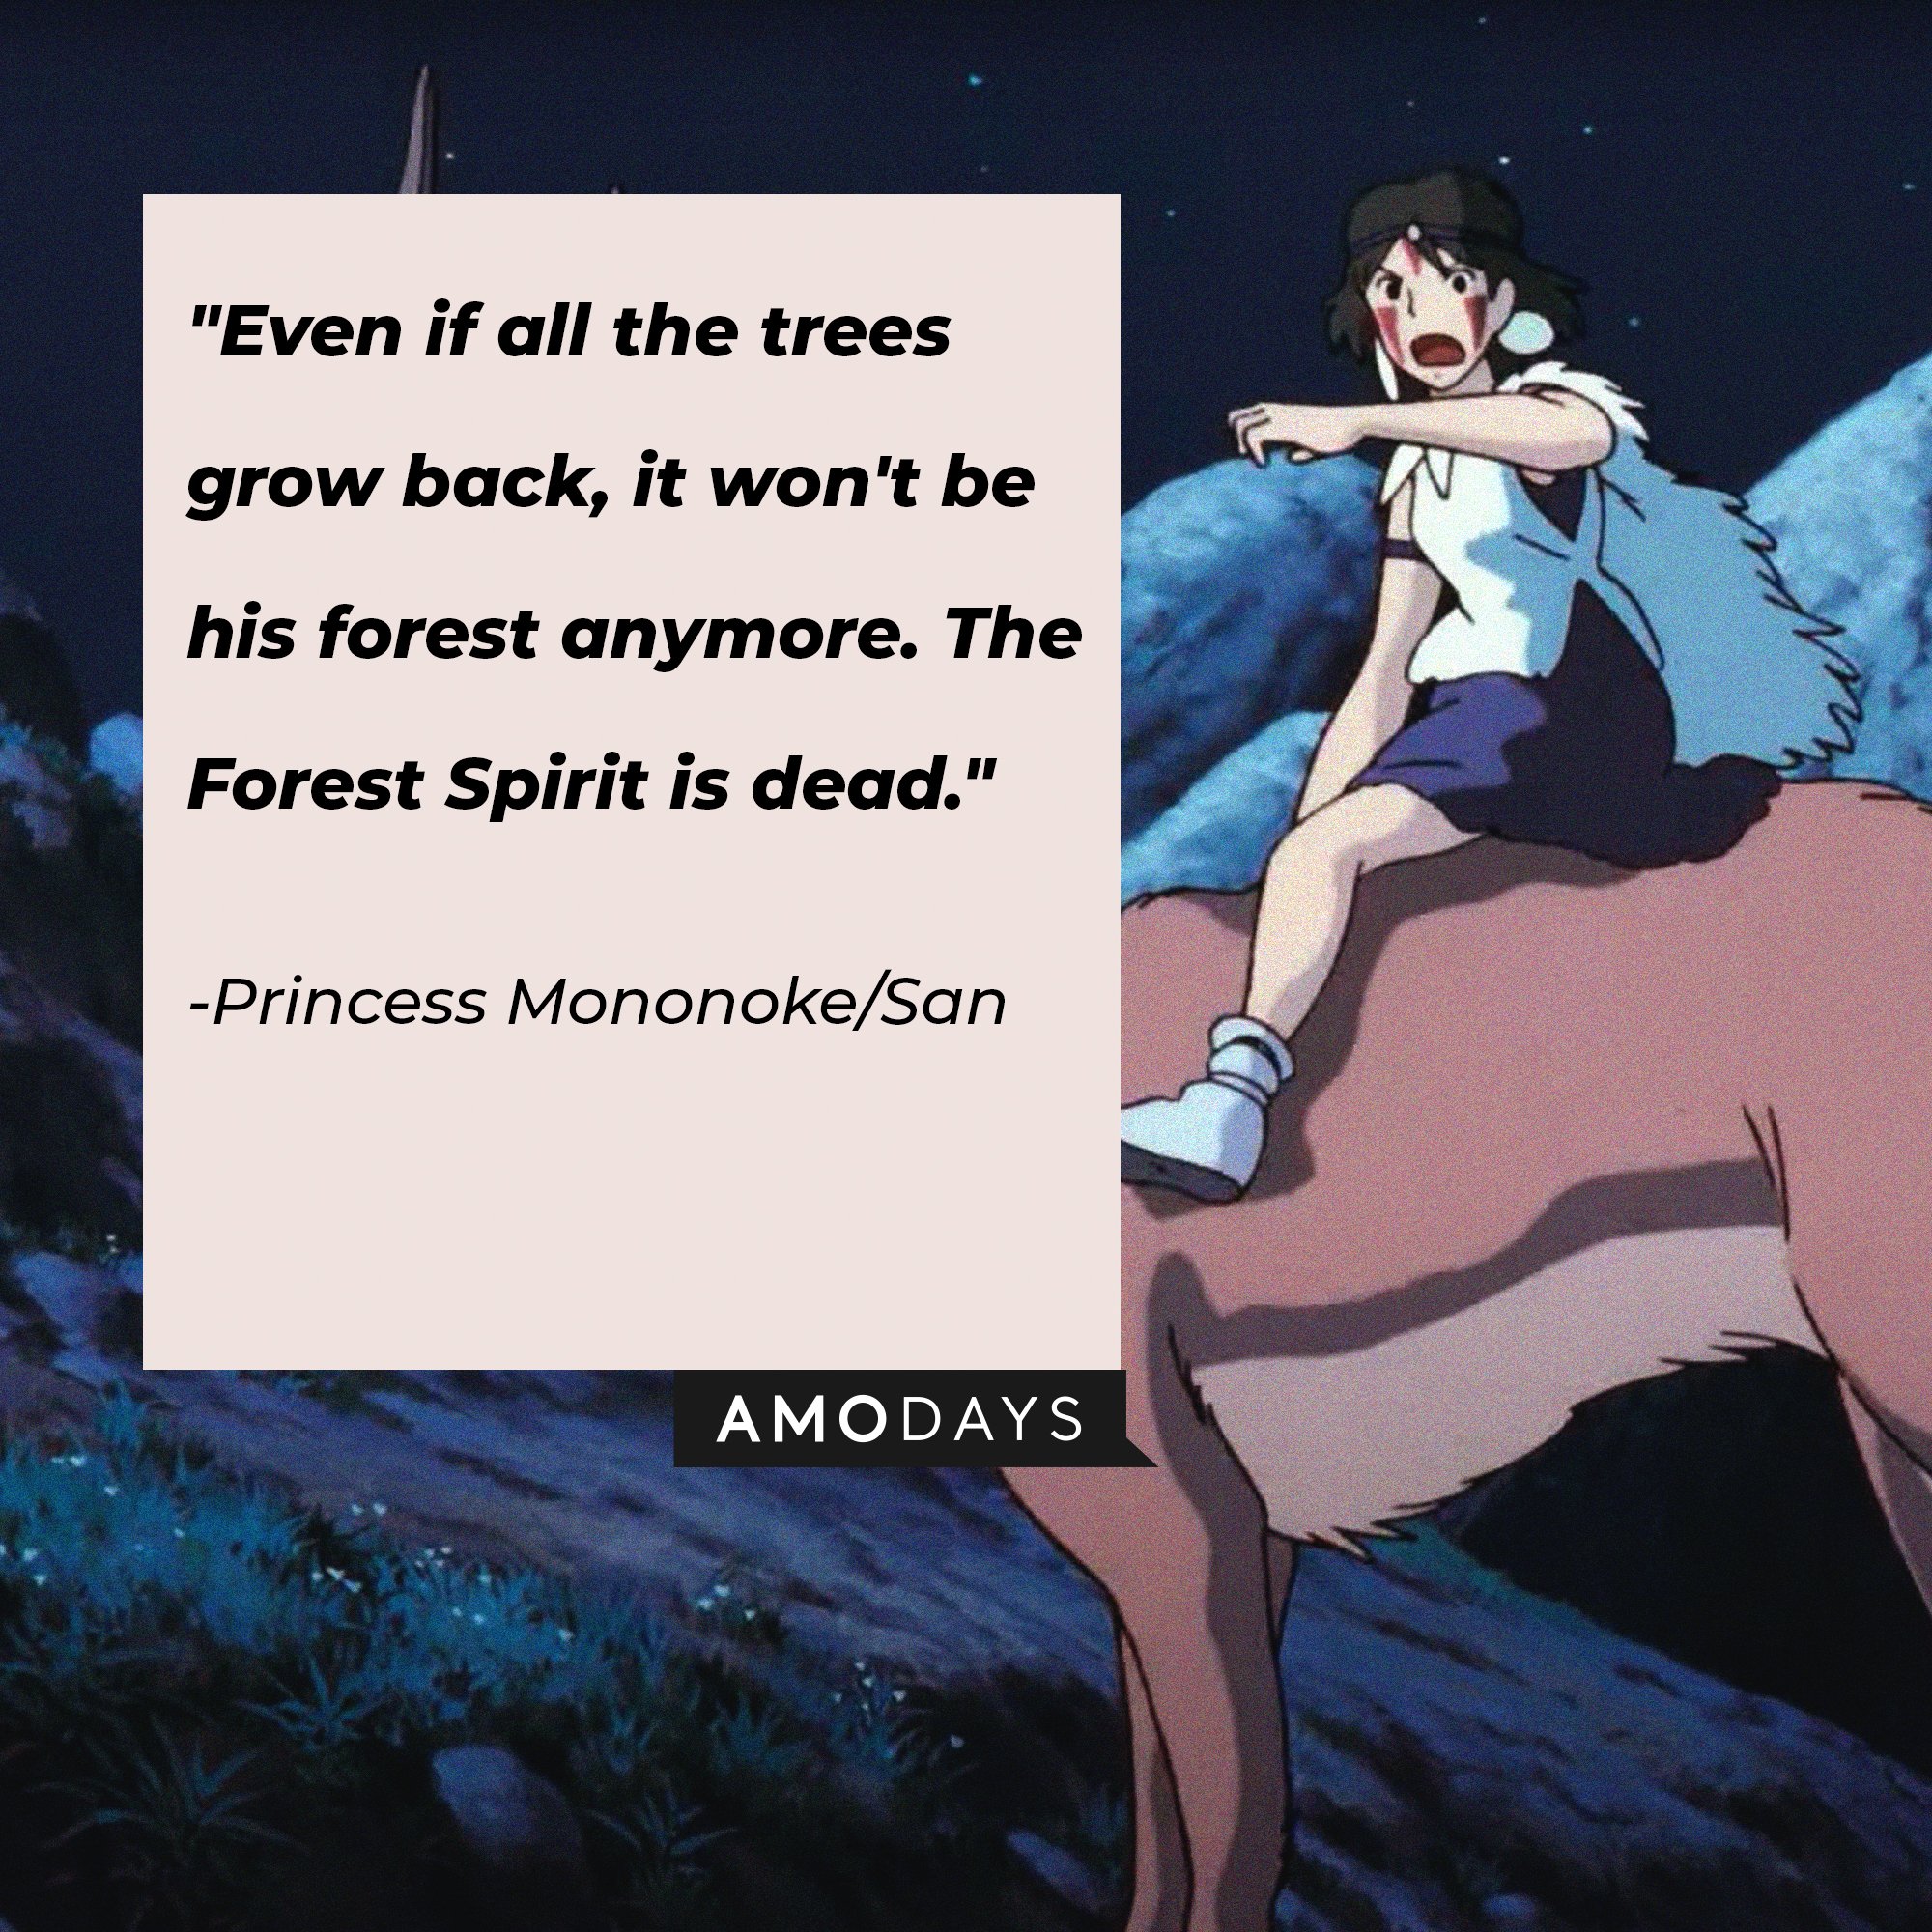 Princess Mononoke/San’s quote: "Even if all the trees grow back, it won't be his forest anymore. The Forest Spirit is dead." | Image: AmoDays